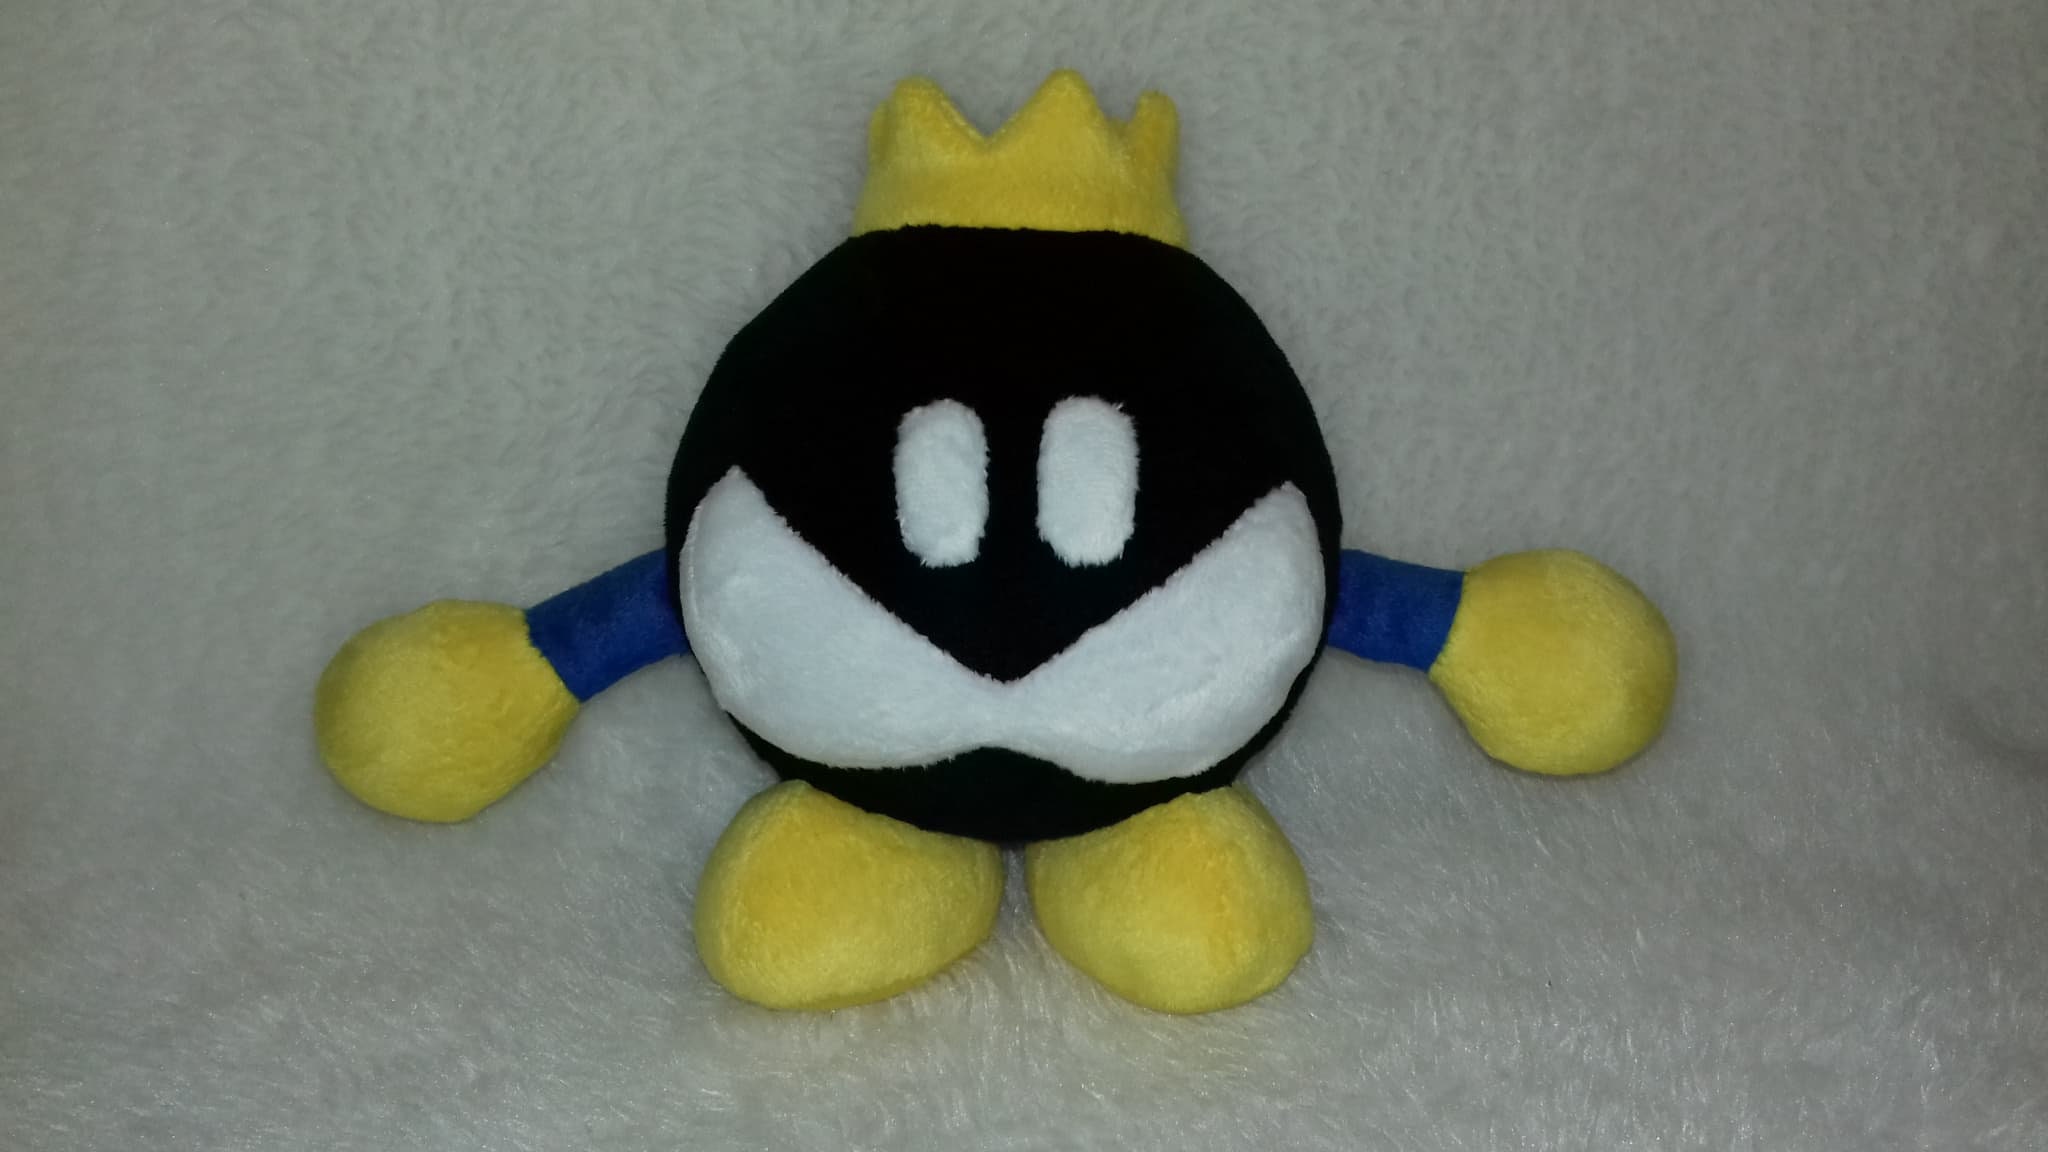 Custom plush inspired by King Bob-omb Super Mario party plush minky 30 cm made to order